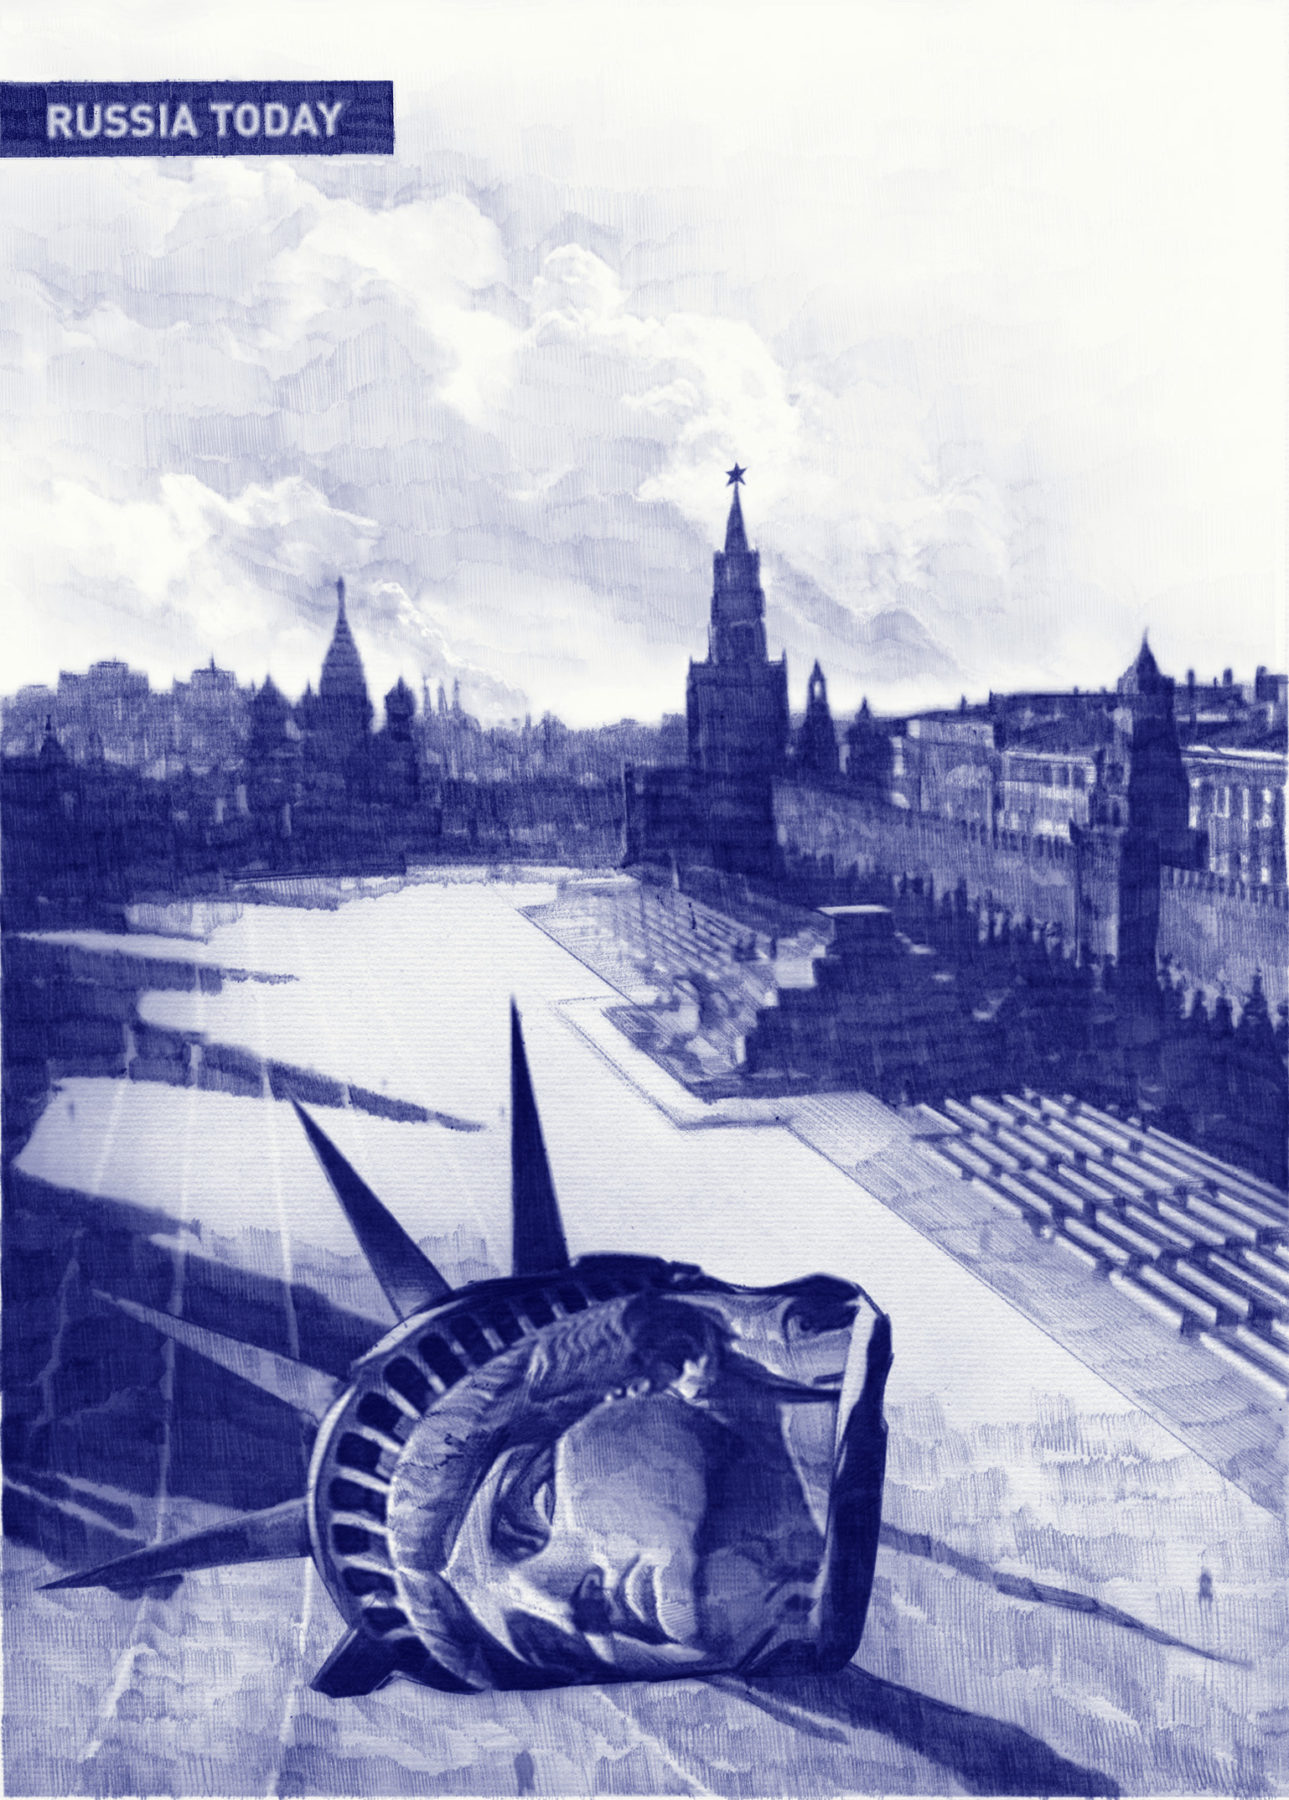 Andrei Molodkin piece featuring the decapitated head of the statue of liberty laying on the ground with Russian landmarks in the background and the text 